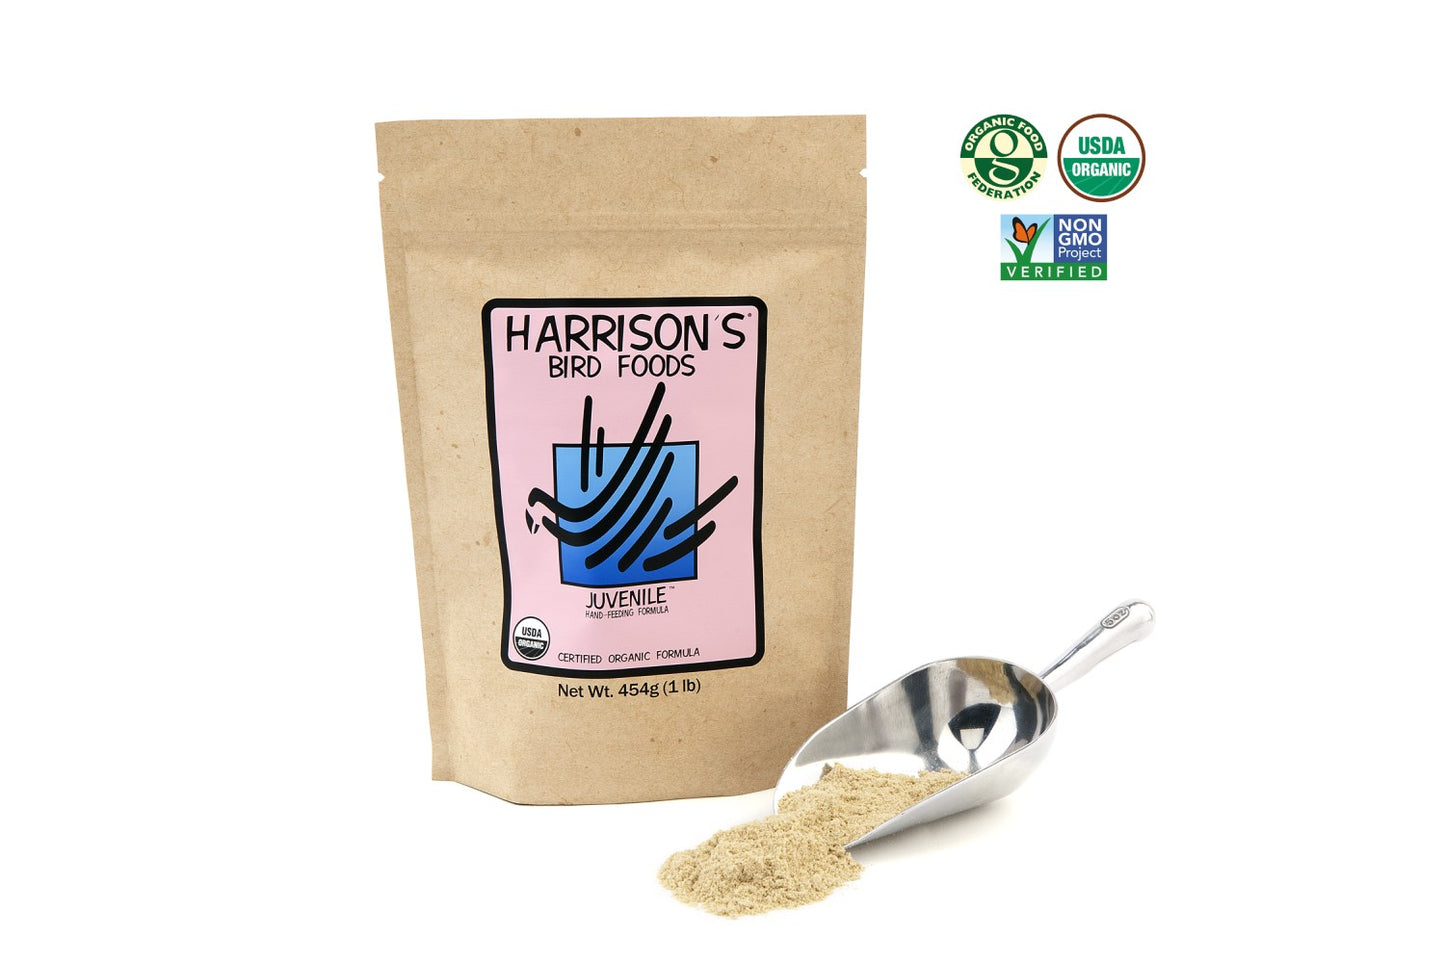 A bag of Harrison's Juvenile Formula, next to a metal scoop full of the formula